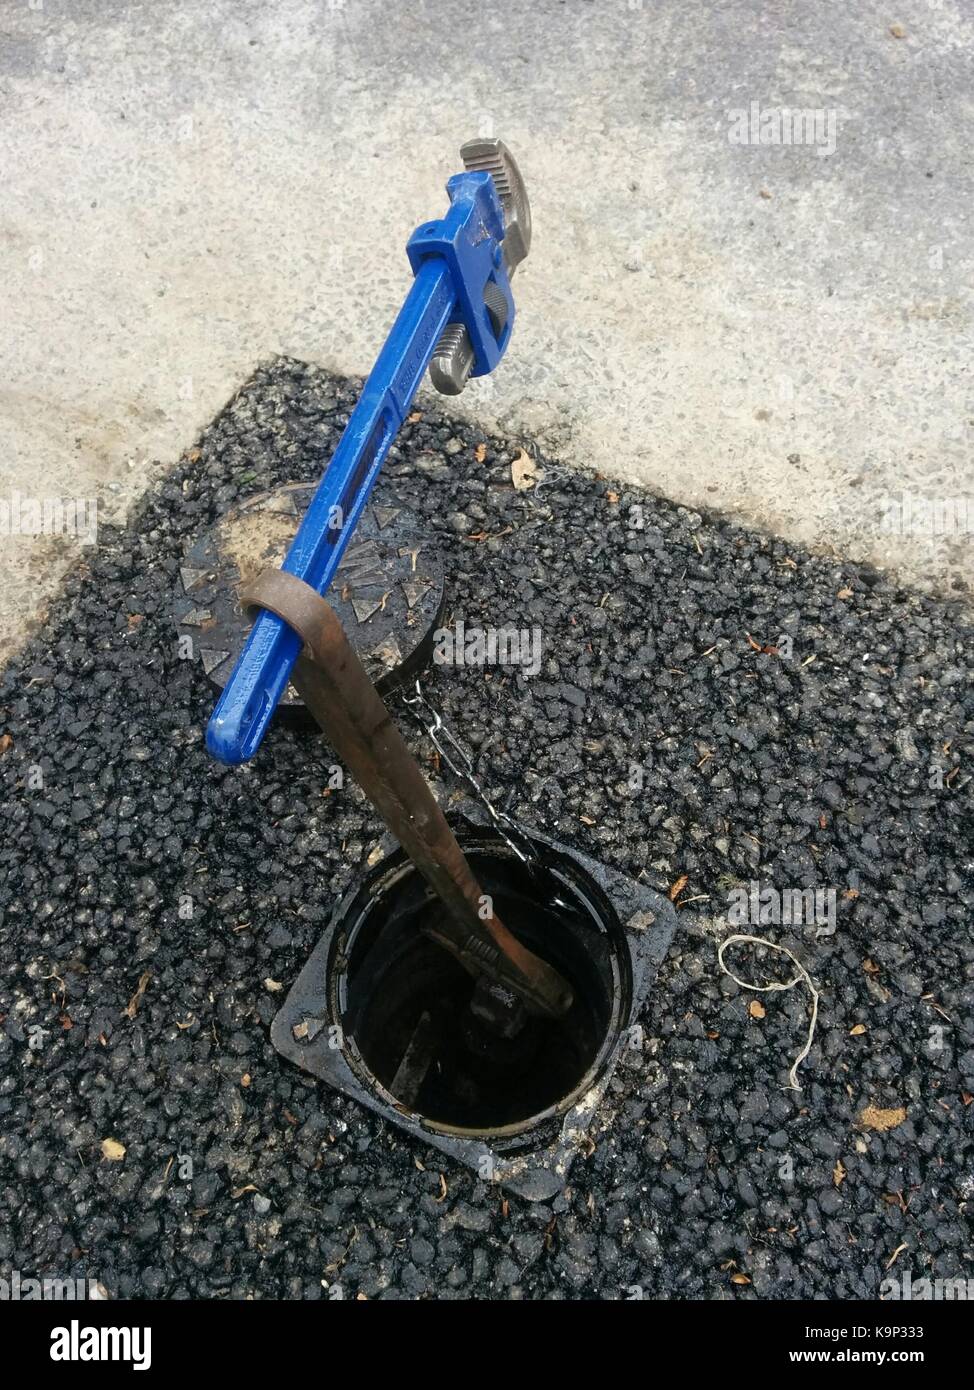 Improvising With Two Tools To Turn Off Water Main Stock Photo